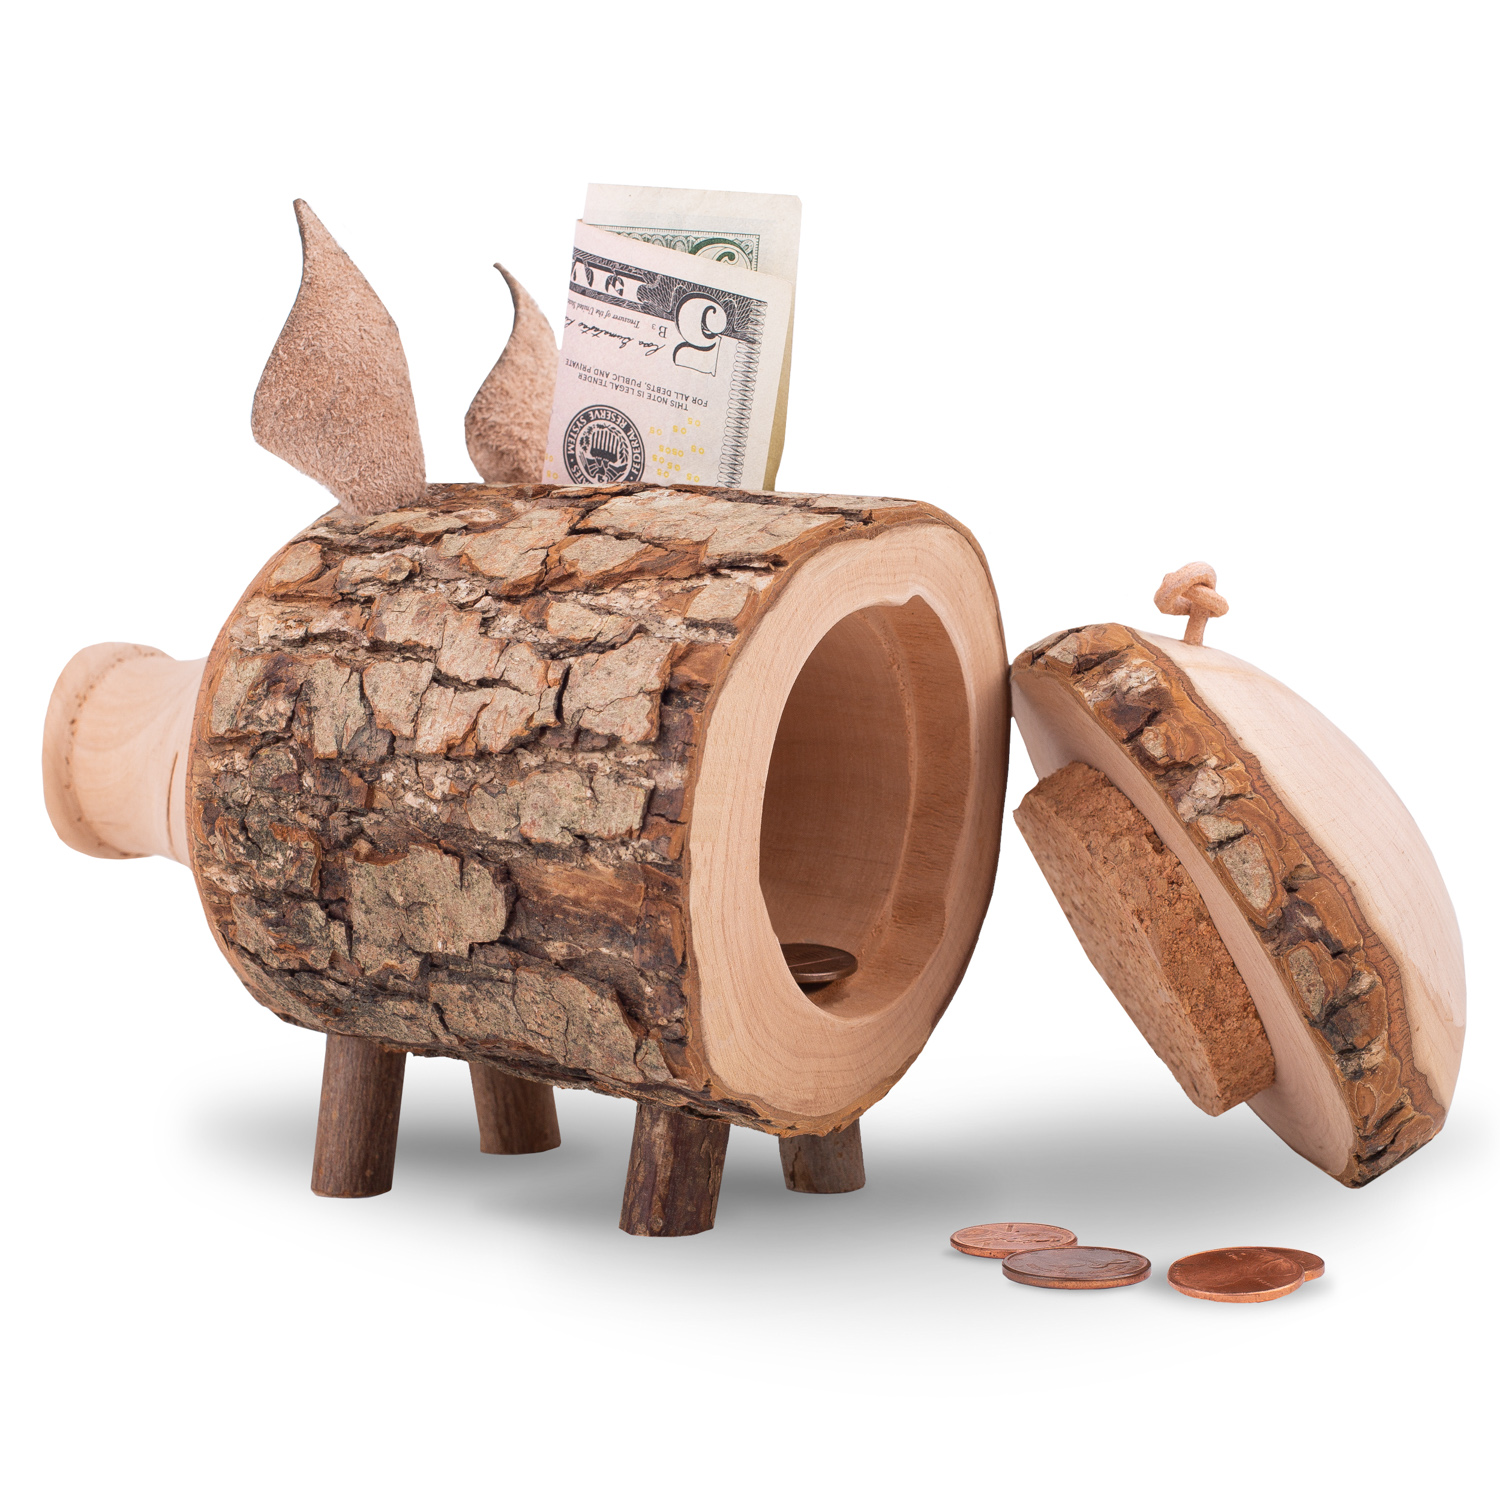 Perfect Wooden Gift Wooden Piggy Bank Handmade in Germany Large Size 